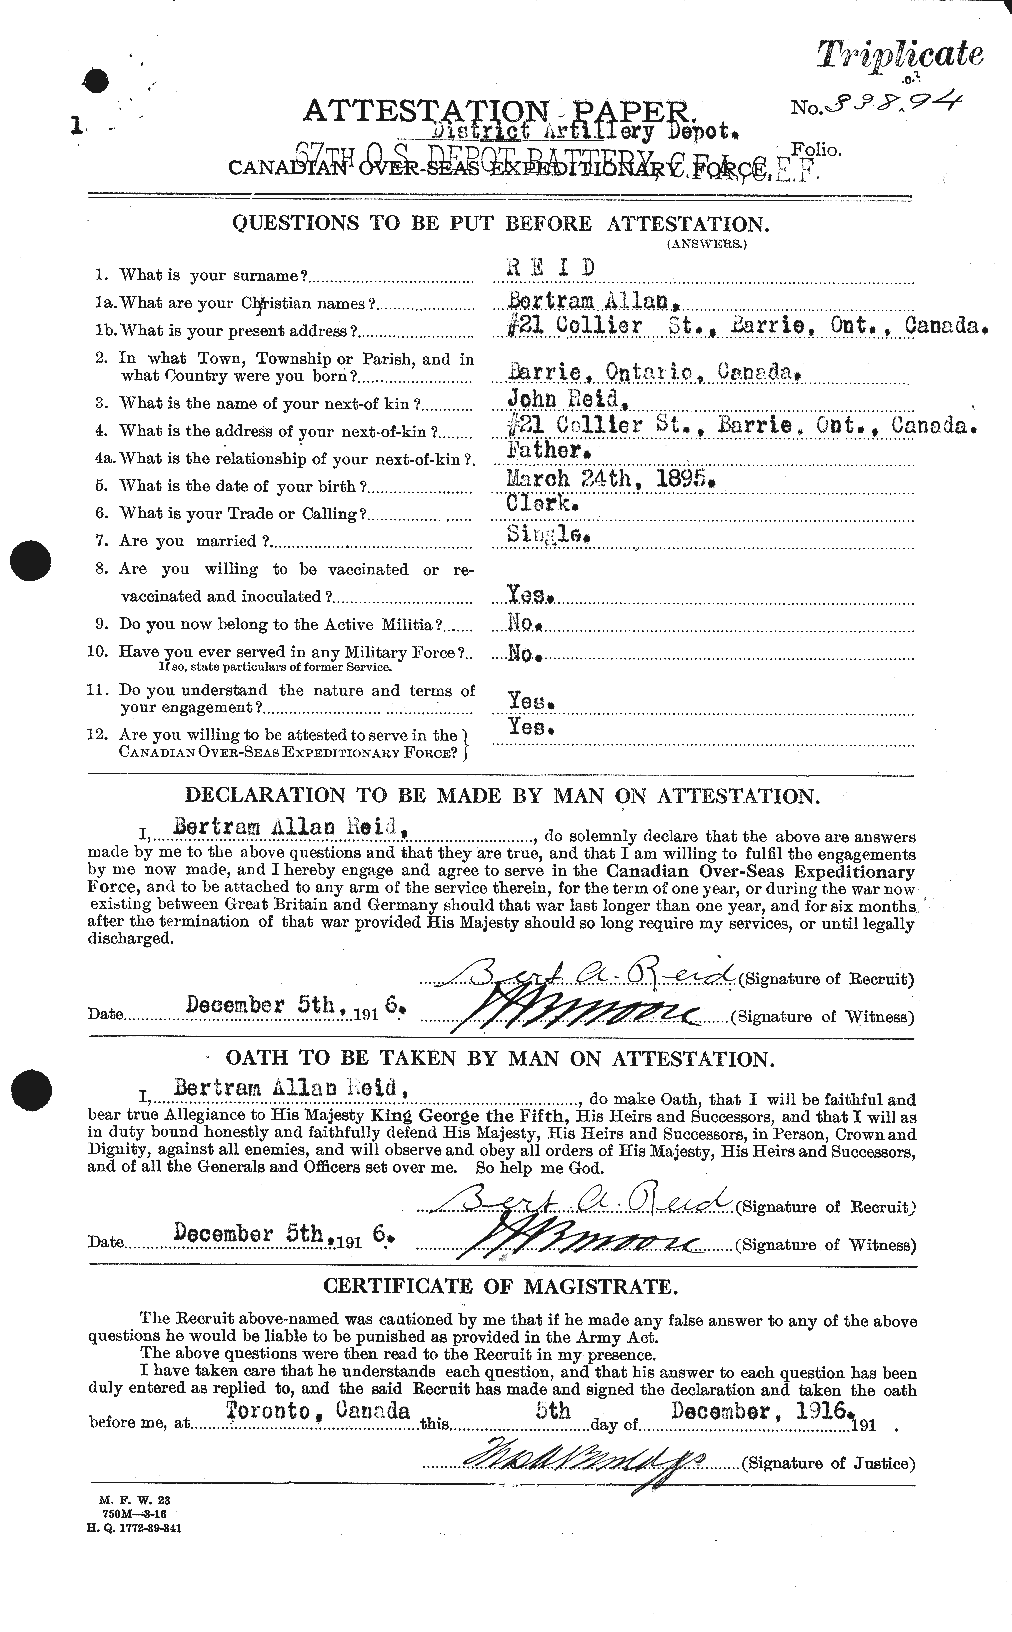 Personnel Records of the First World War - CEF 597859a